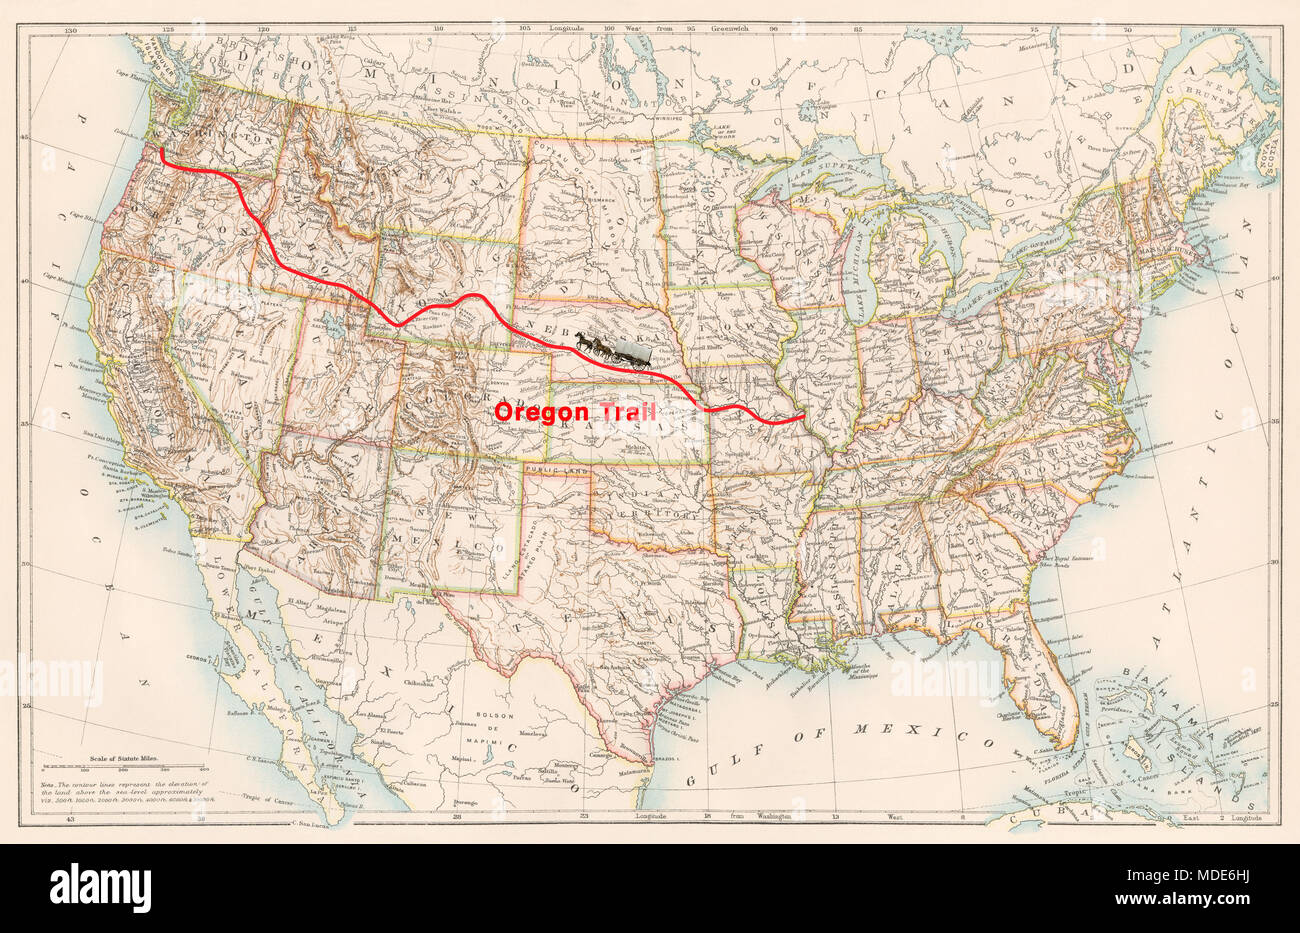 Oregon Trail route on an 1870s map of the US. Digital illustration Stock  Photo - Alamy